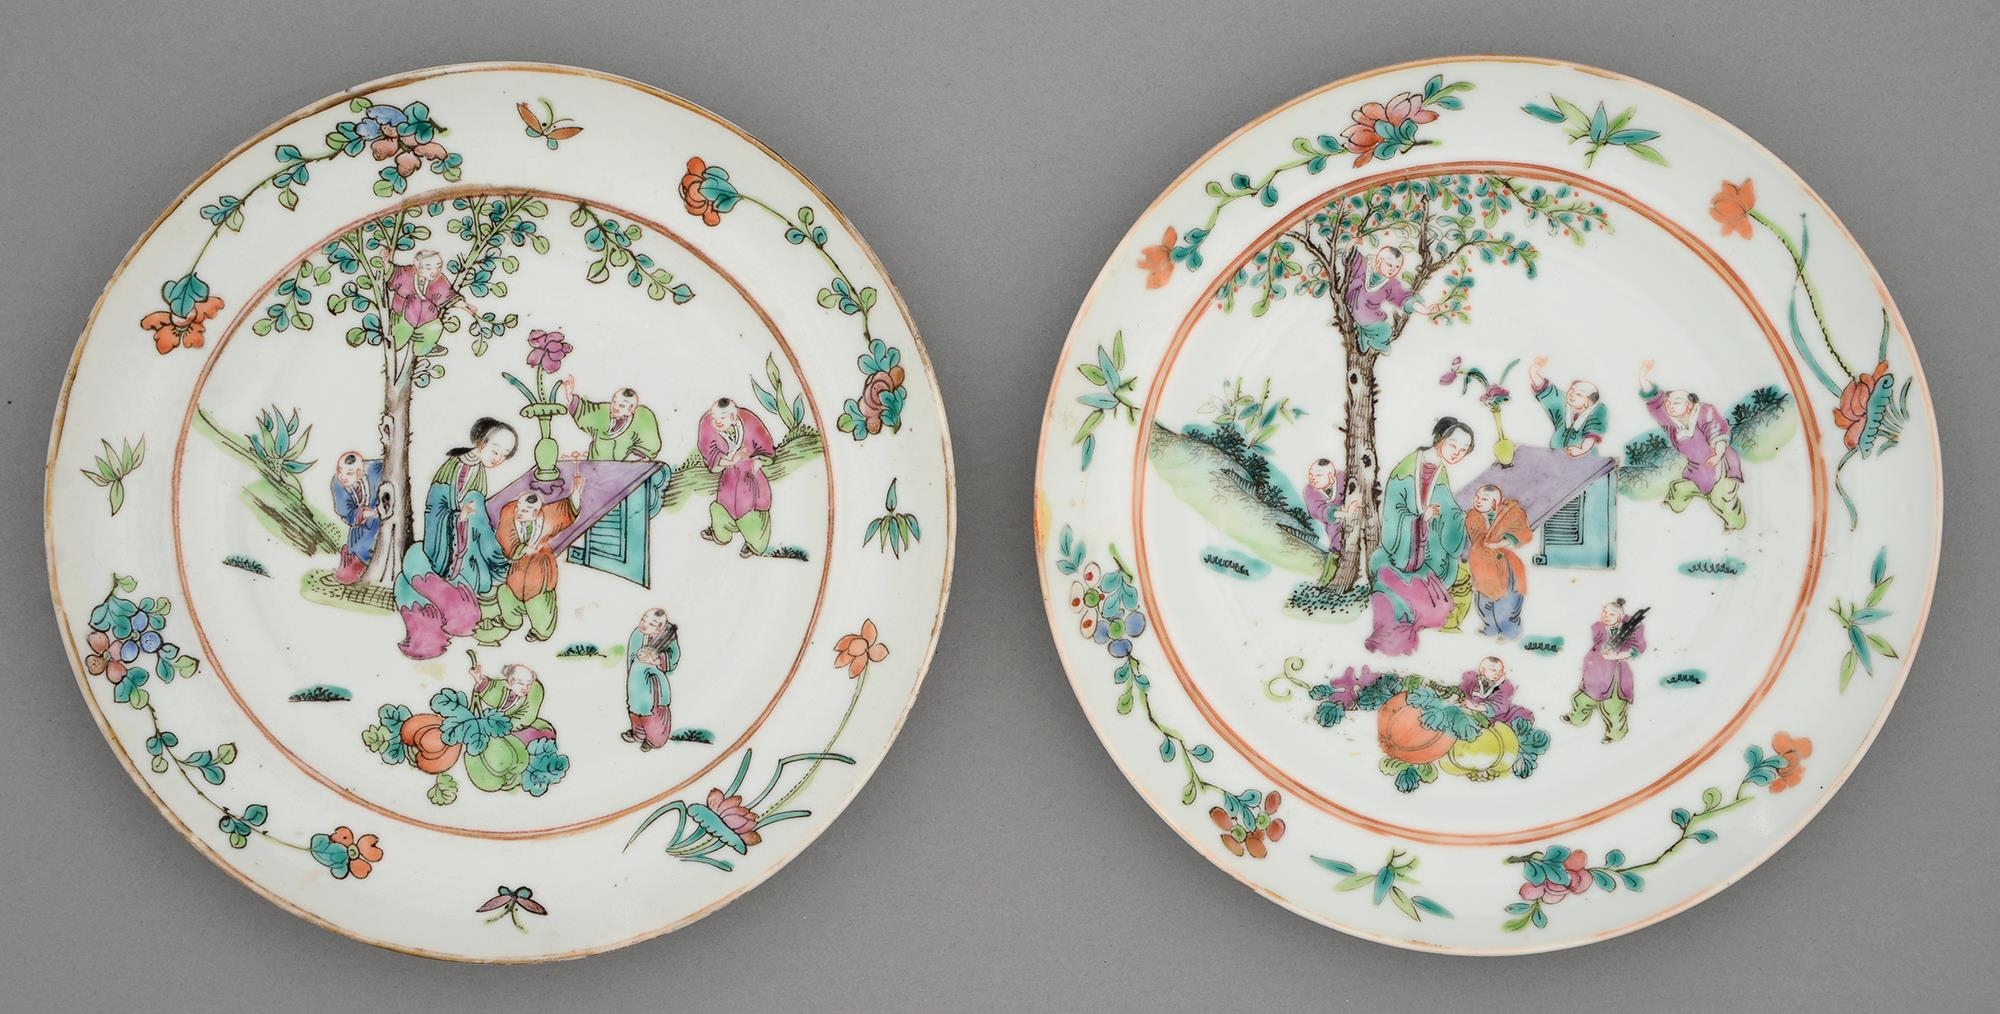 Two Chinese famille rose plates, late 19th c, painted with a lady at a table attended by seven young